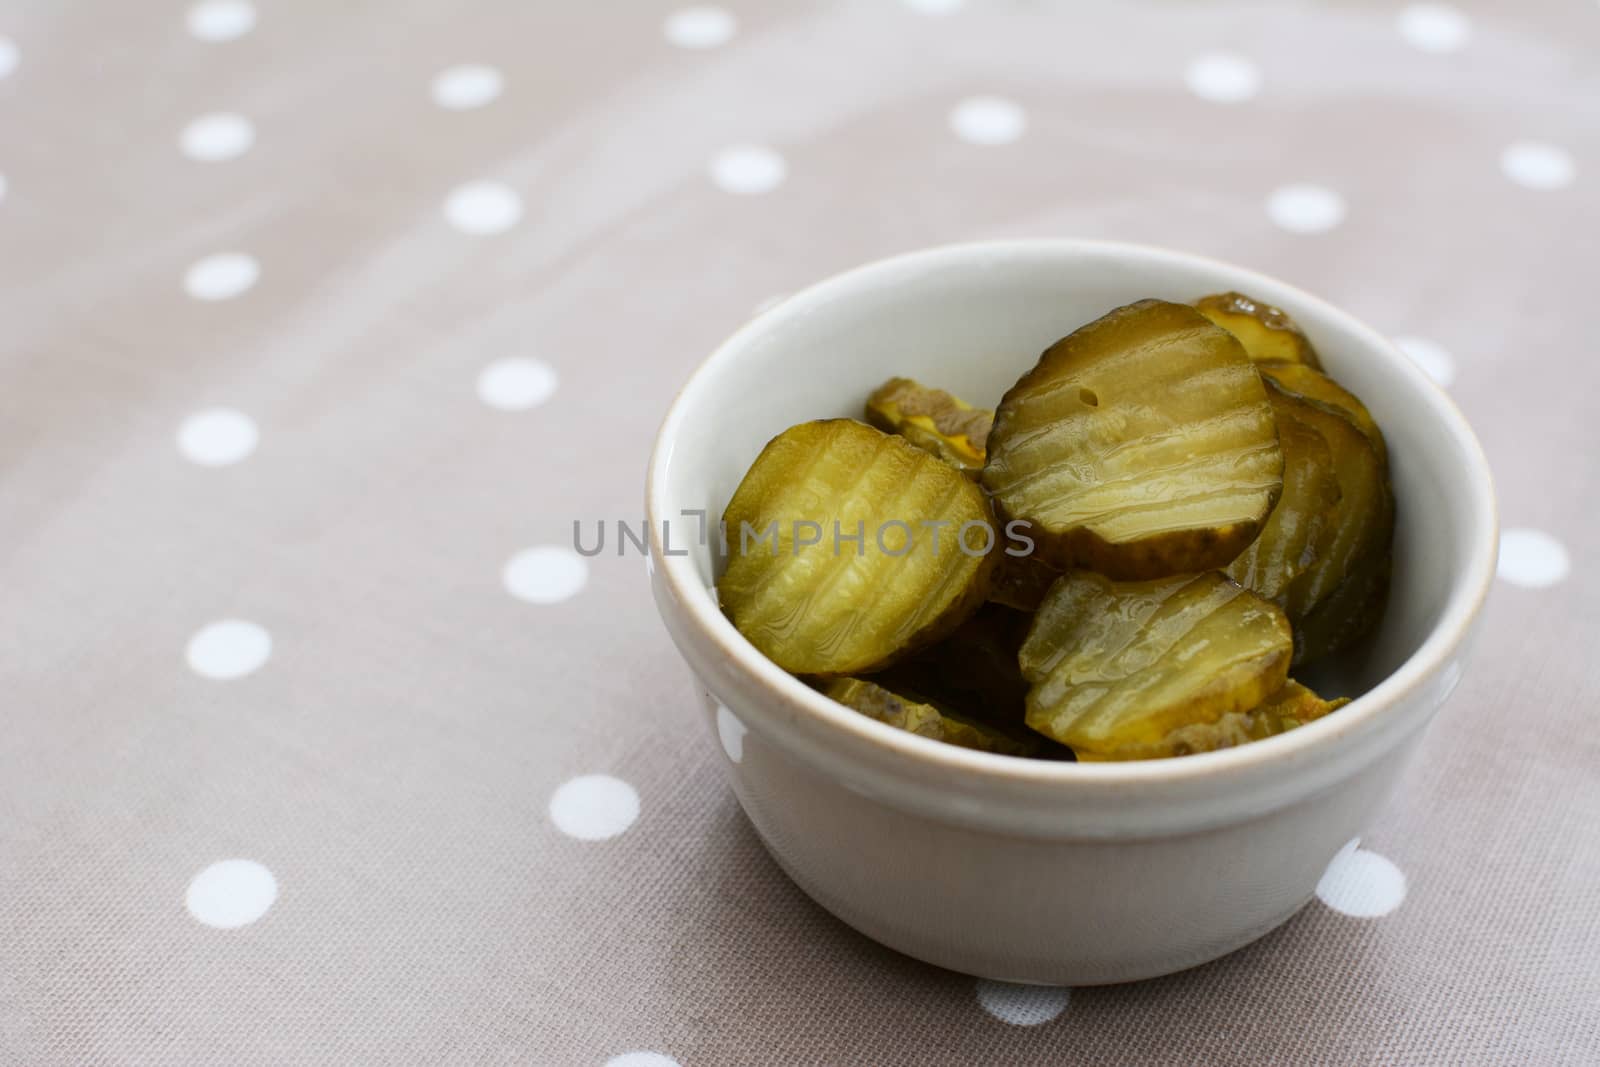 Slices of juicy, sour gherkins in a small ceramic pot on a dining table with copy space